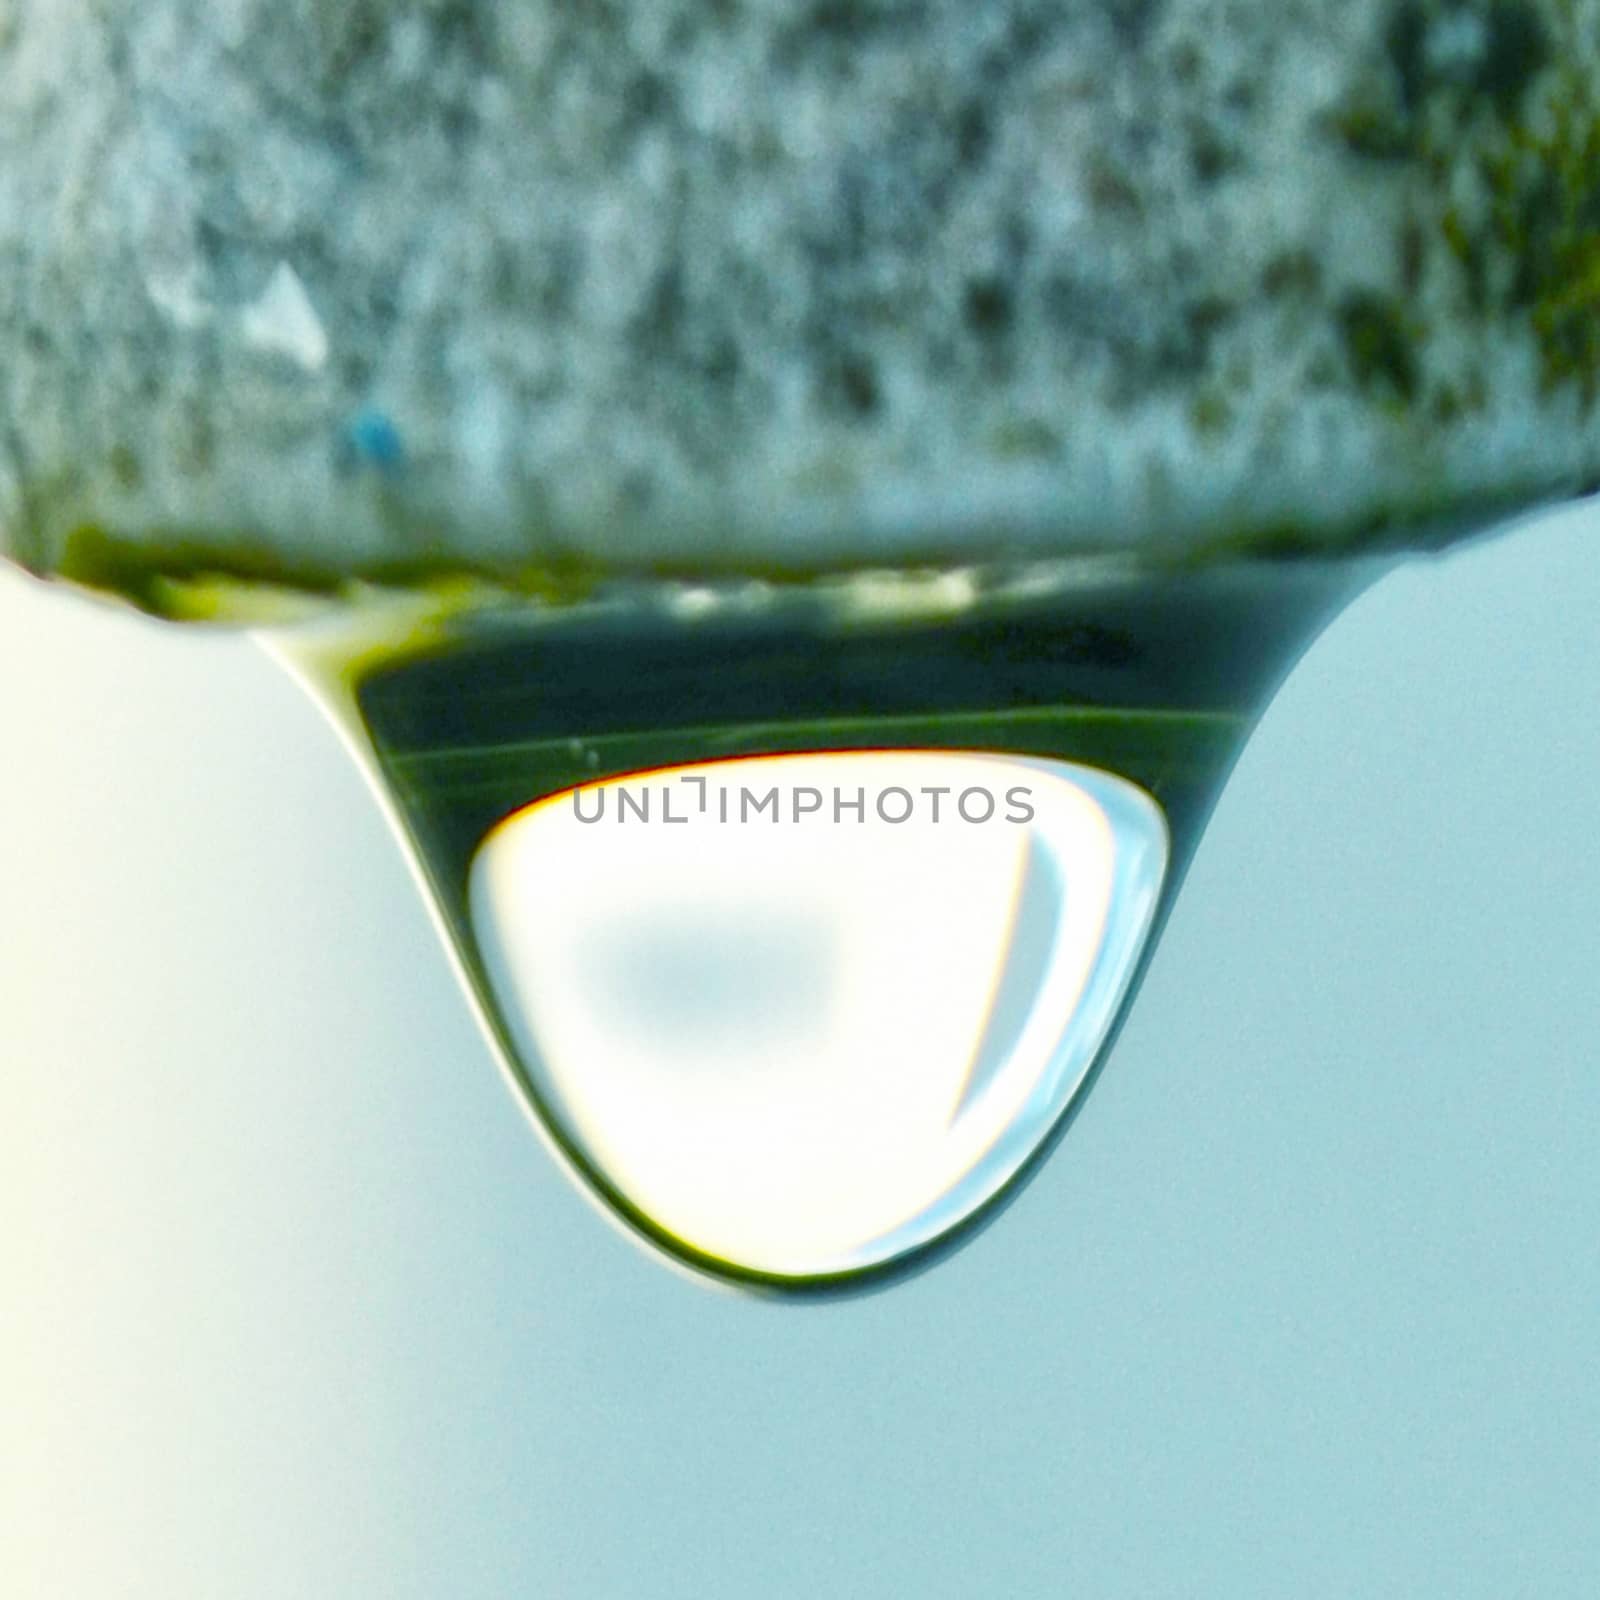 The round transparent drop of water falls downward by Emdaduljs